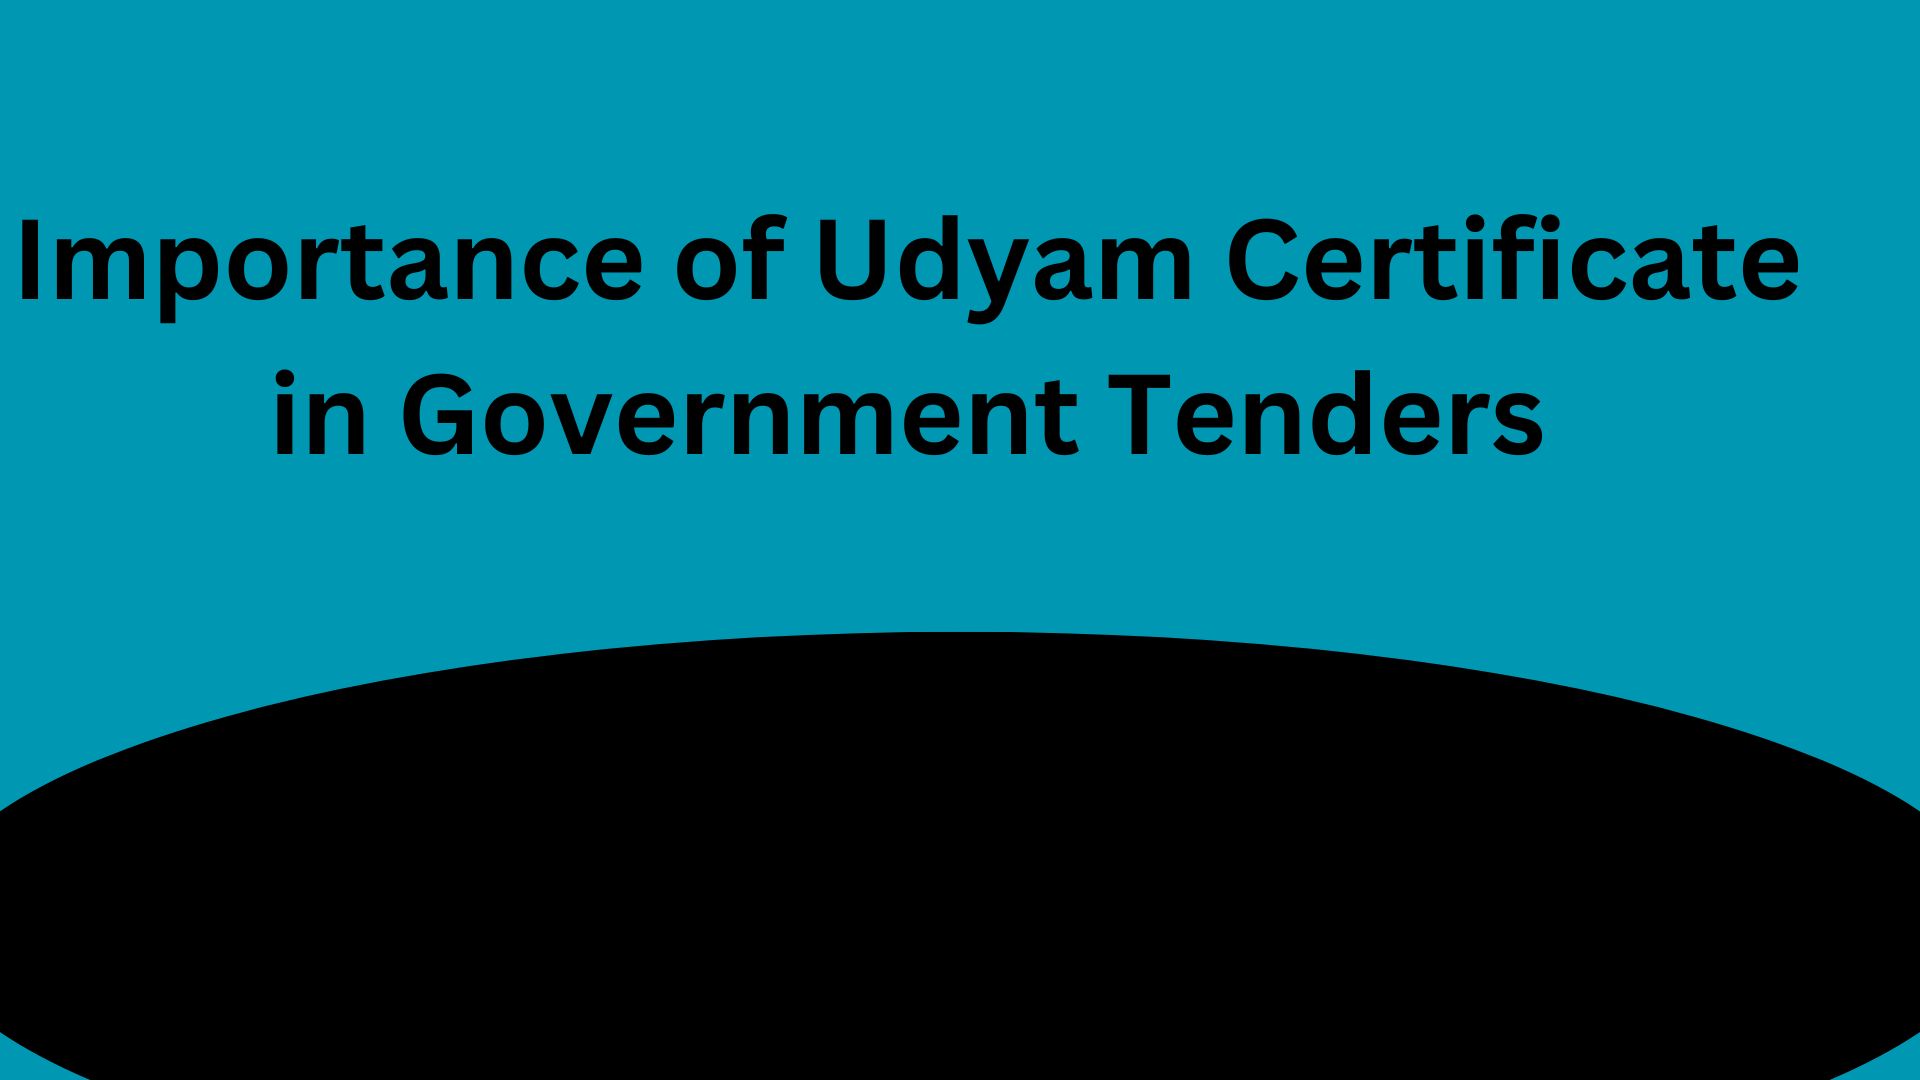 Importance of Udyam Certificate in Government Tenders